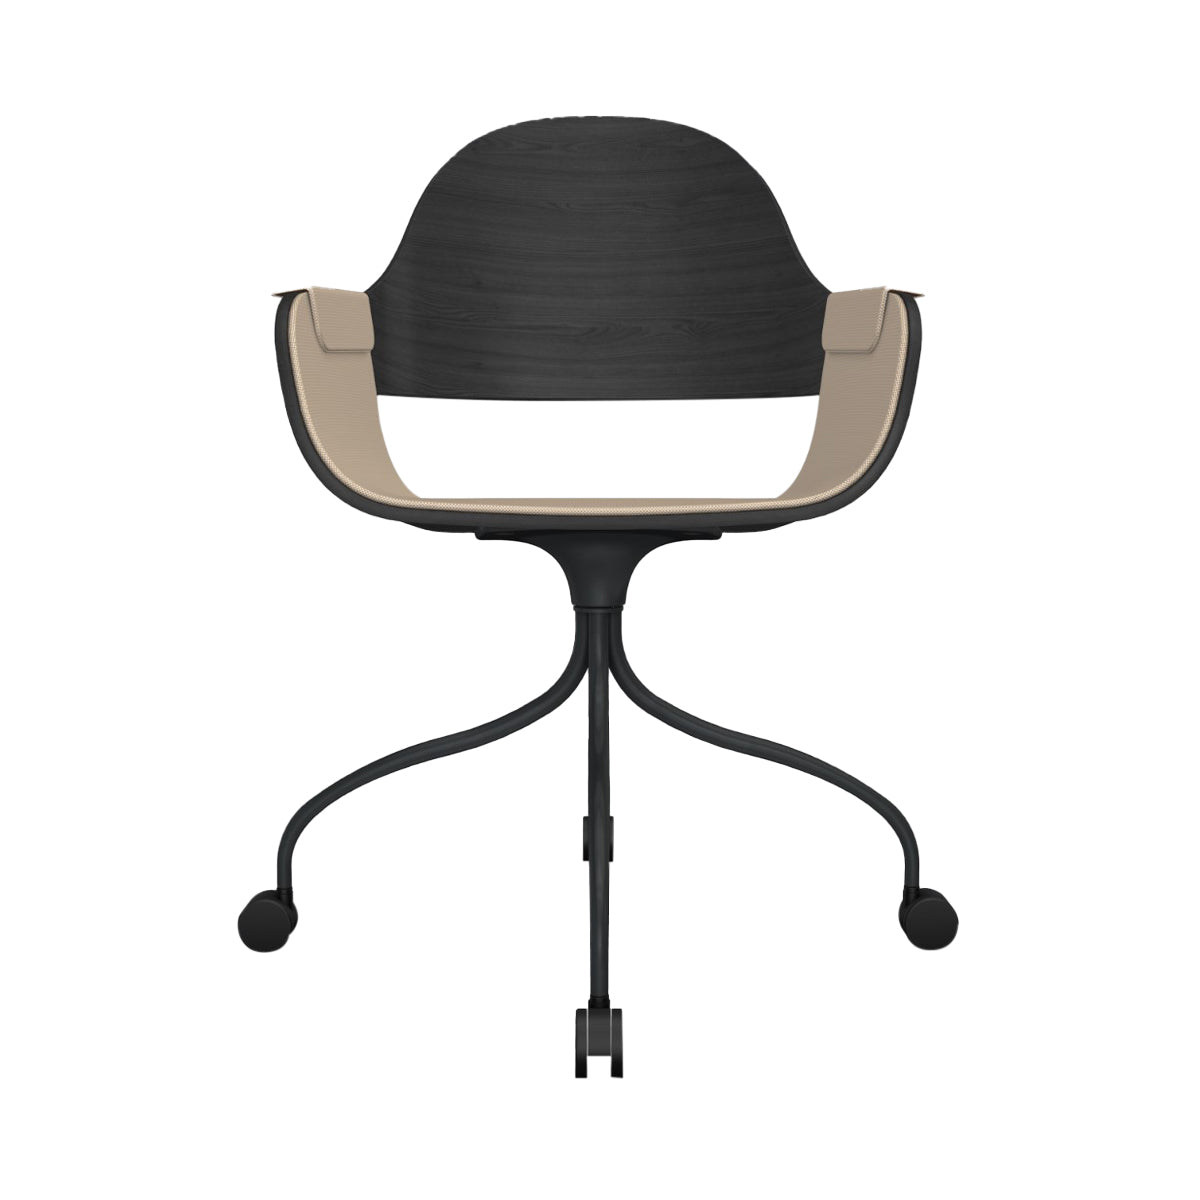 Showtime Nude Chair with Wheel: Interior Seat + Armrest Upholstered + Ash Stained Black + Anthracite Grey